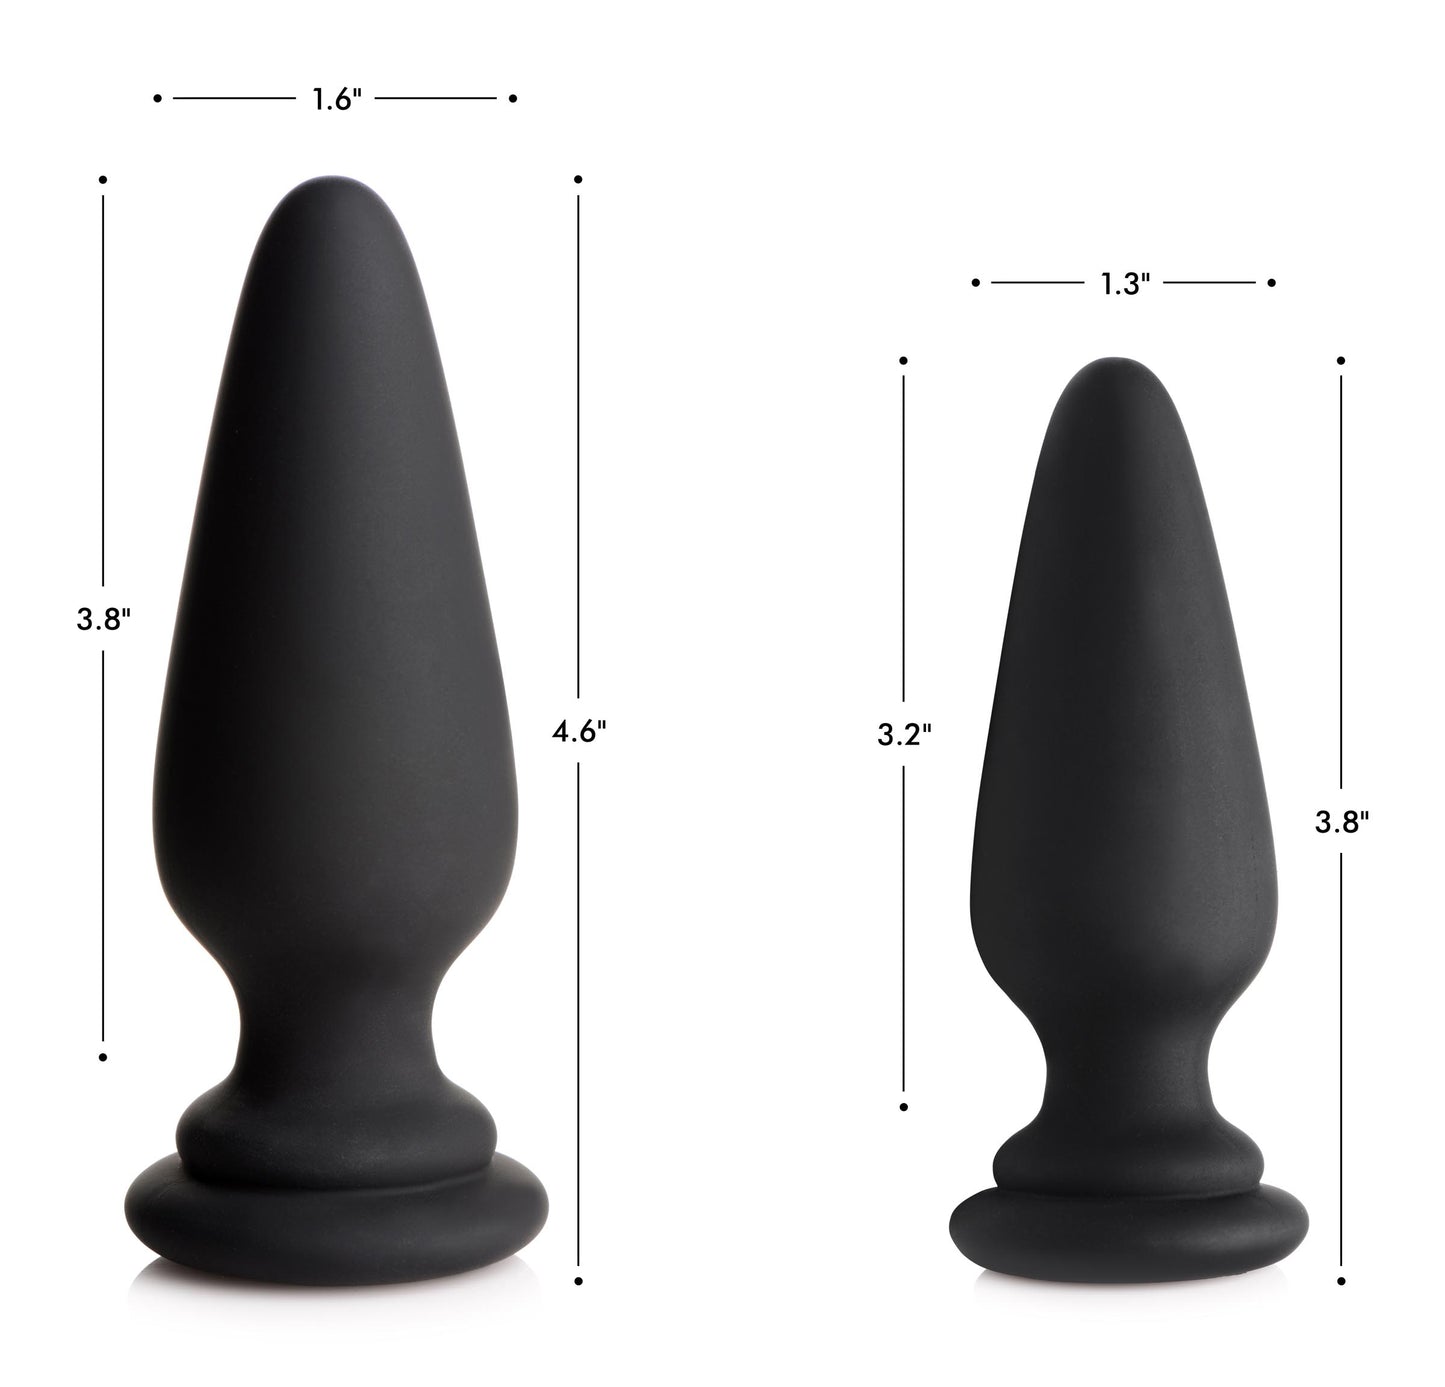 Large Anal Plug with Interchangeable Bunny Tail - Black - UABDSM